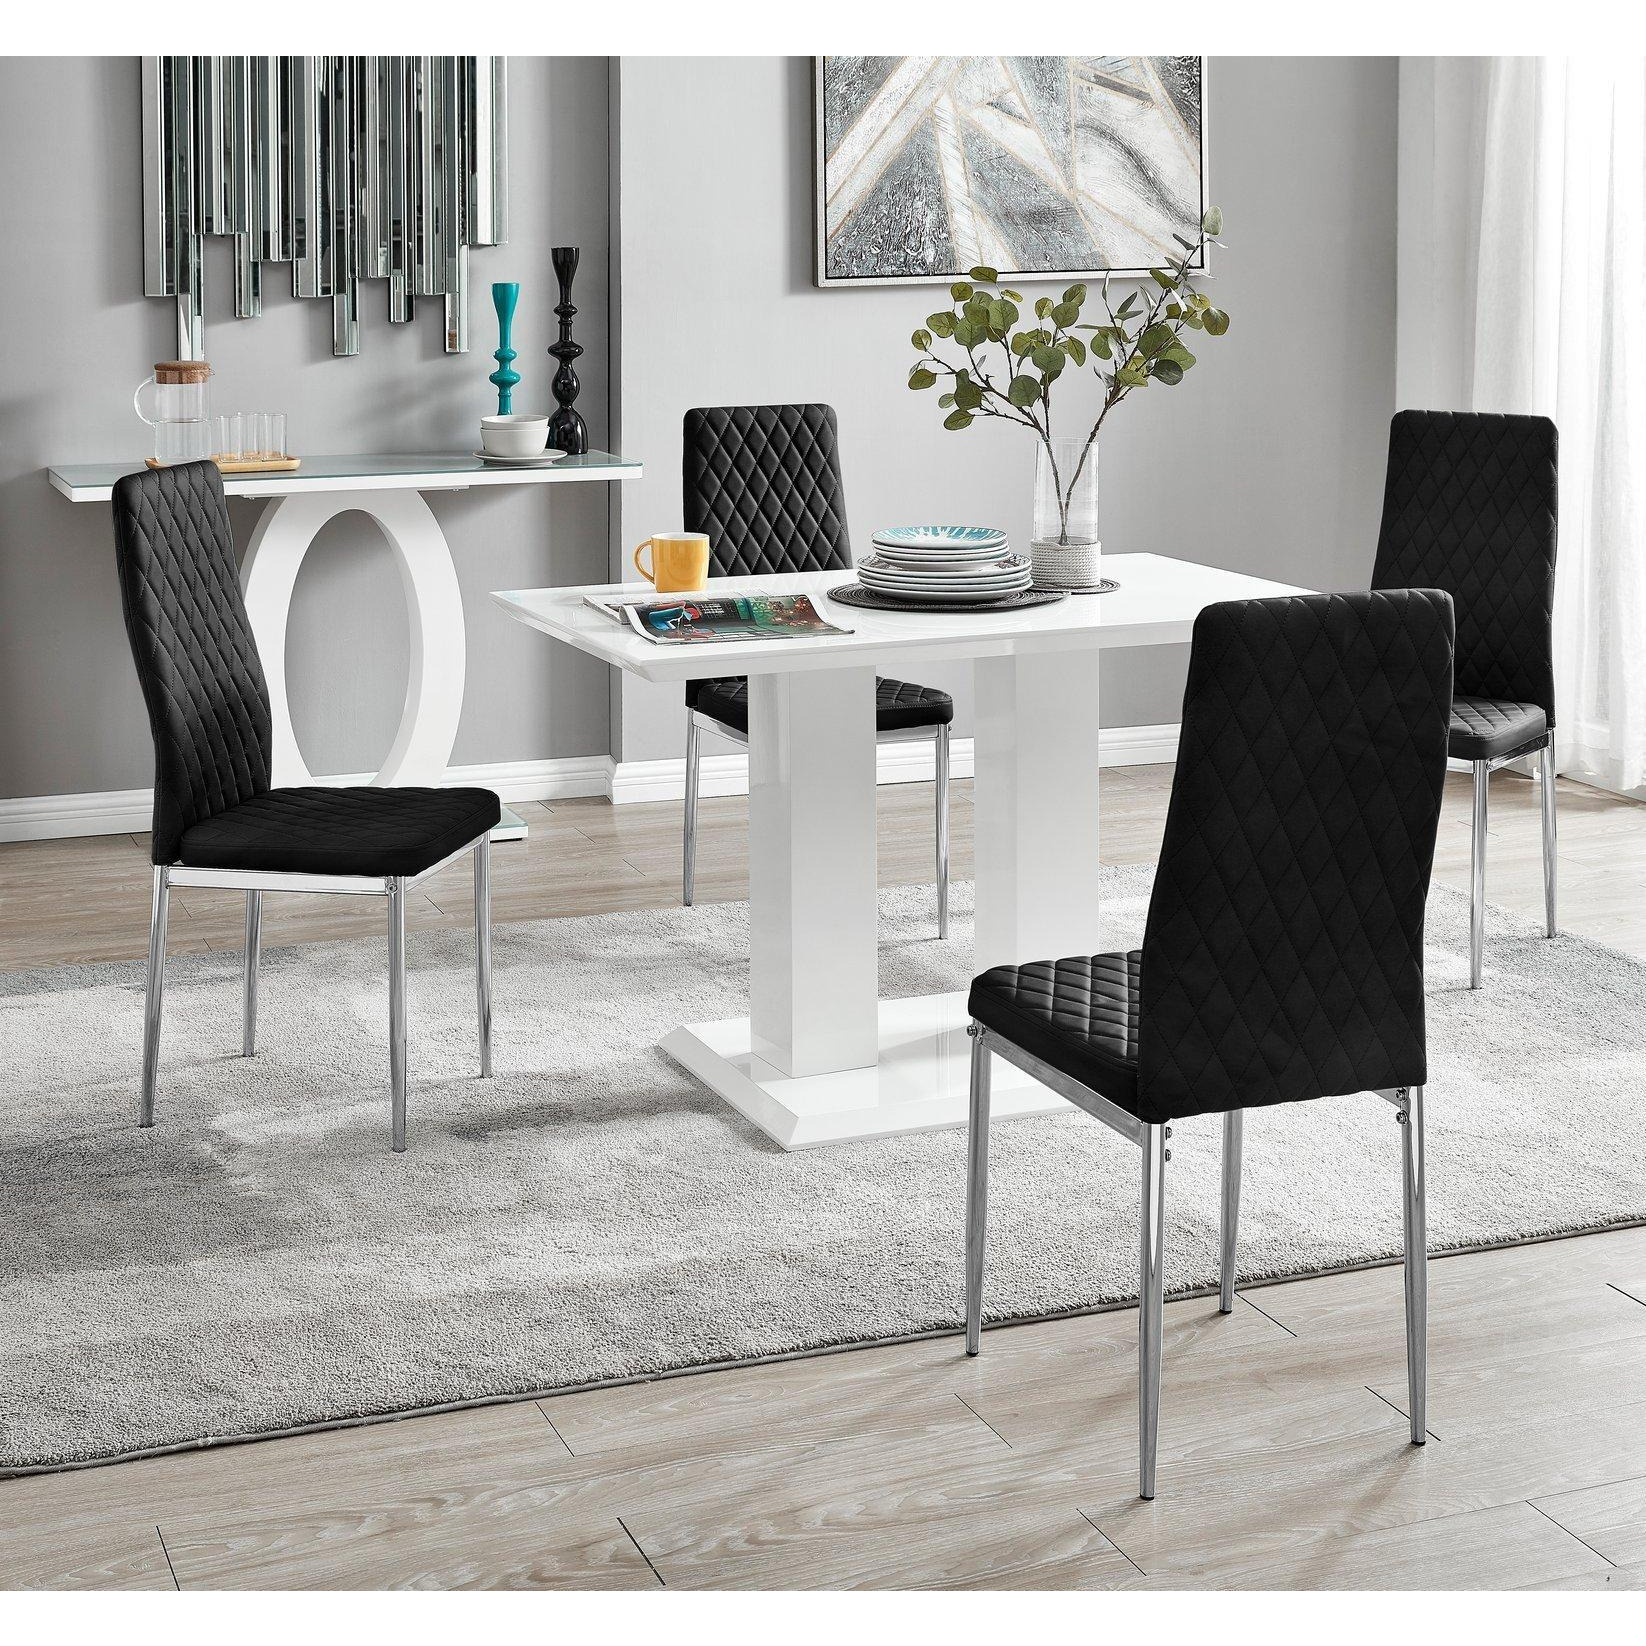 Imperia 4 Seater Modern White High Gloss Rectangular Dining Table And 4 Milan Velvet Chairs - image 1